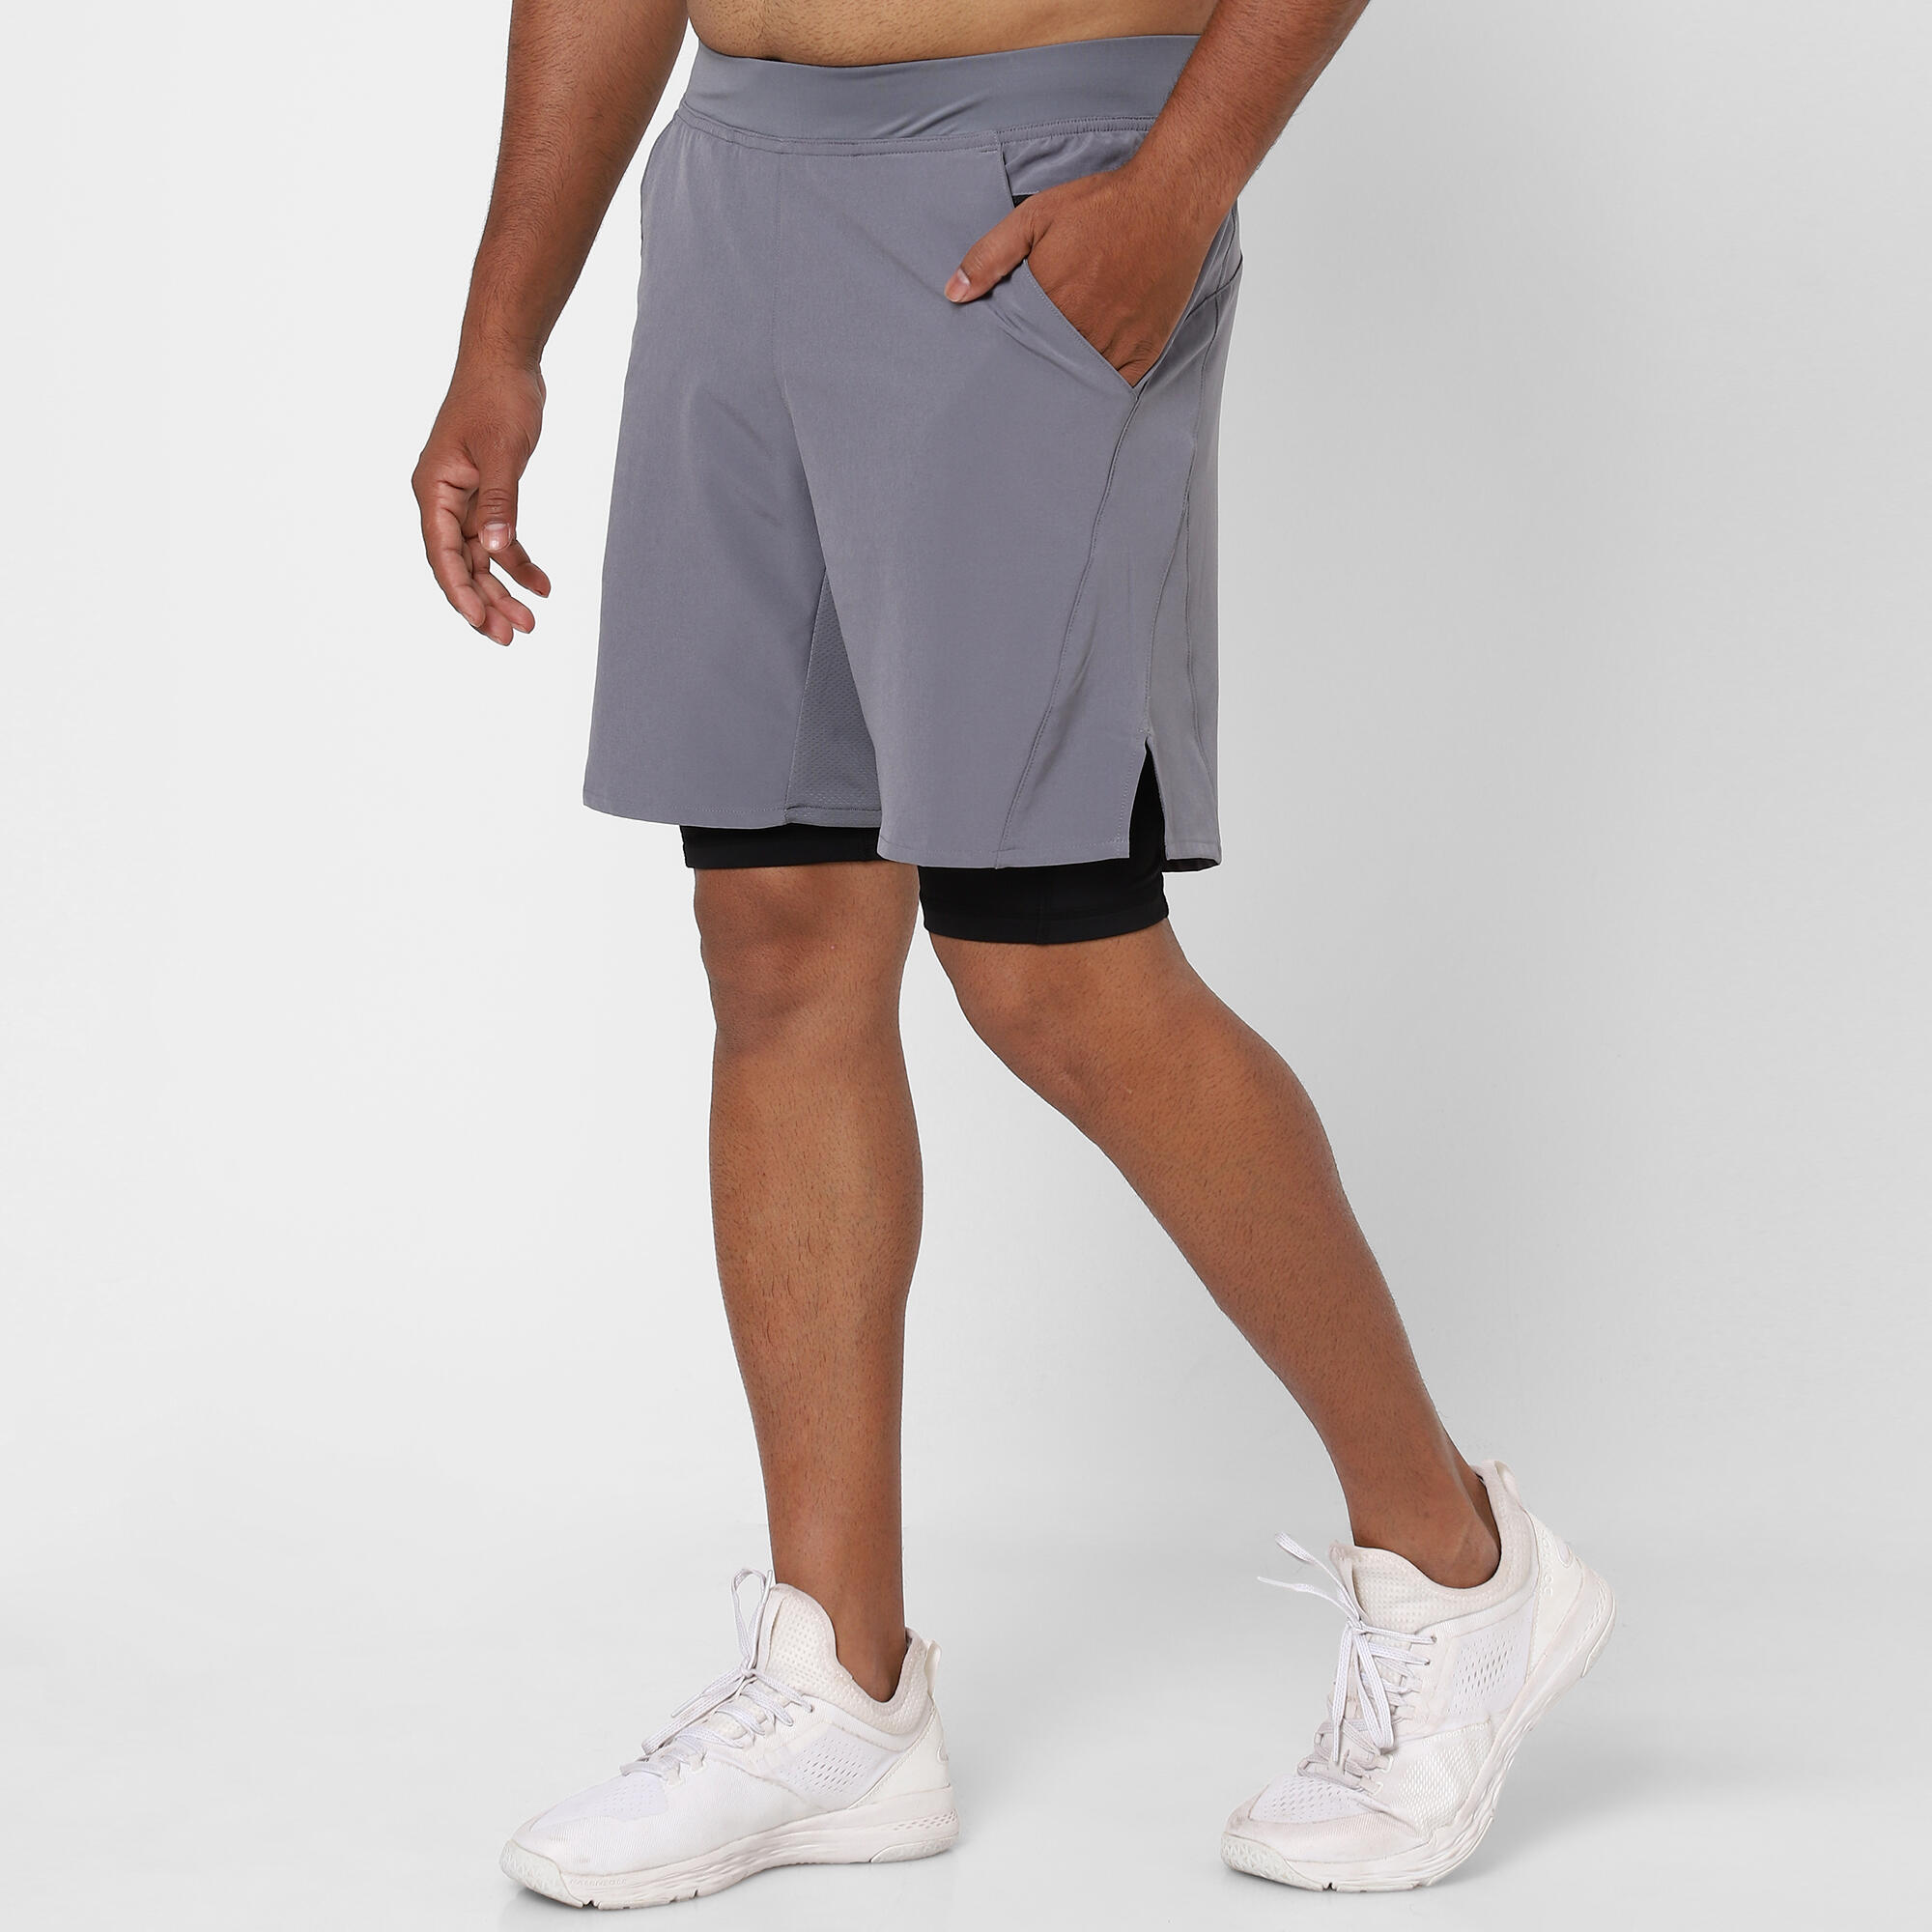 GO-DRY Training Shorts With Inner Tights at Rs 550/piece, Peenya, Bengaluru